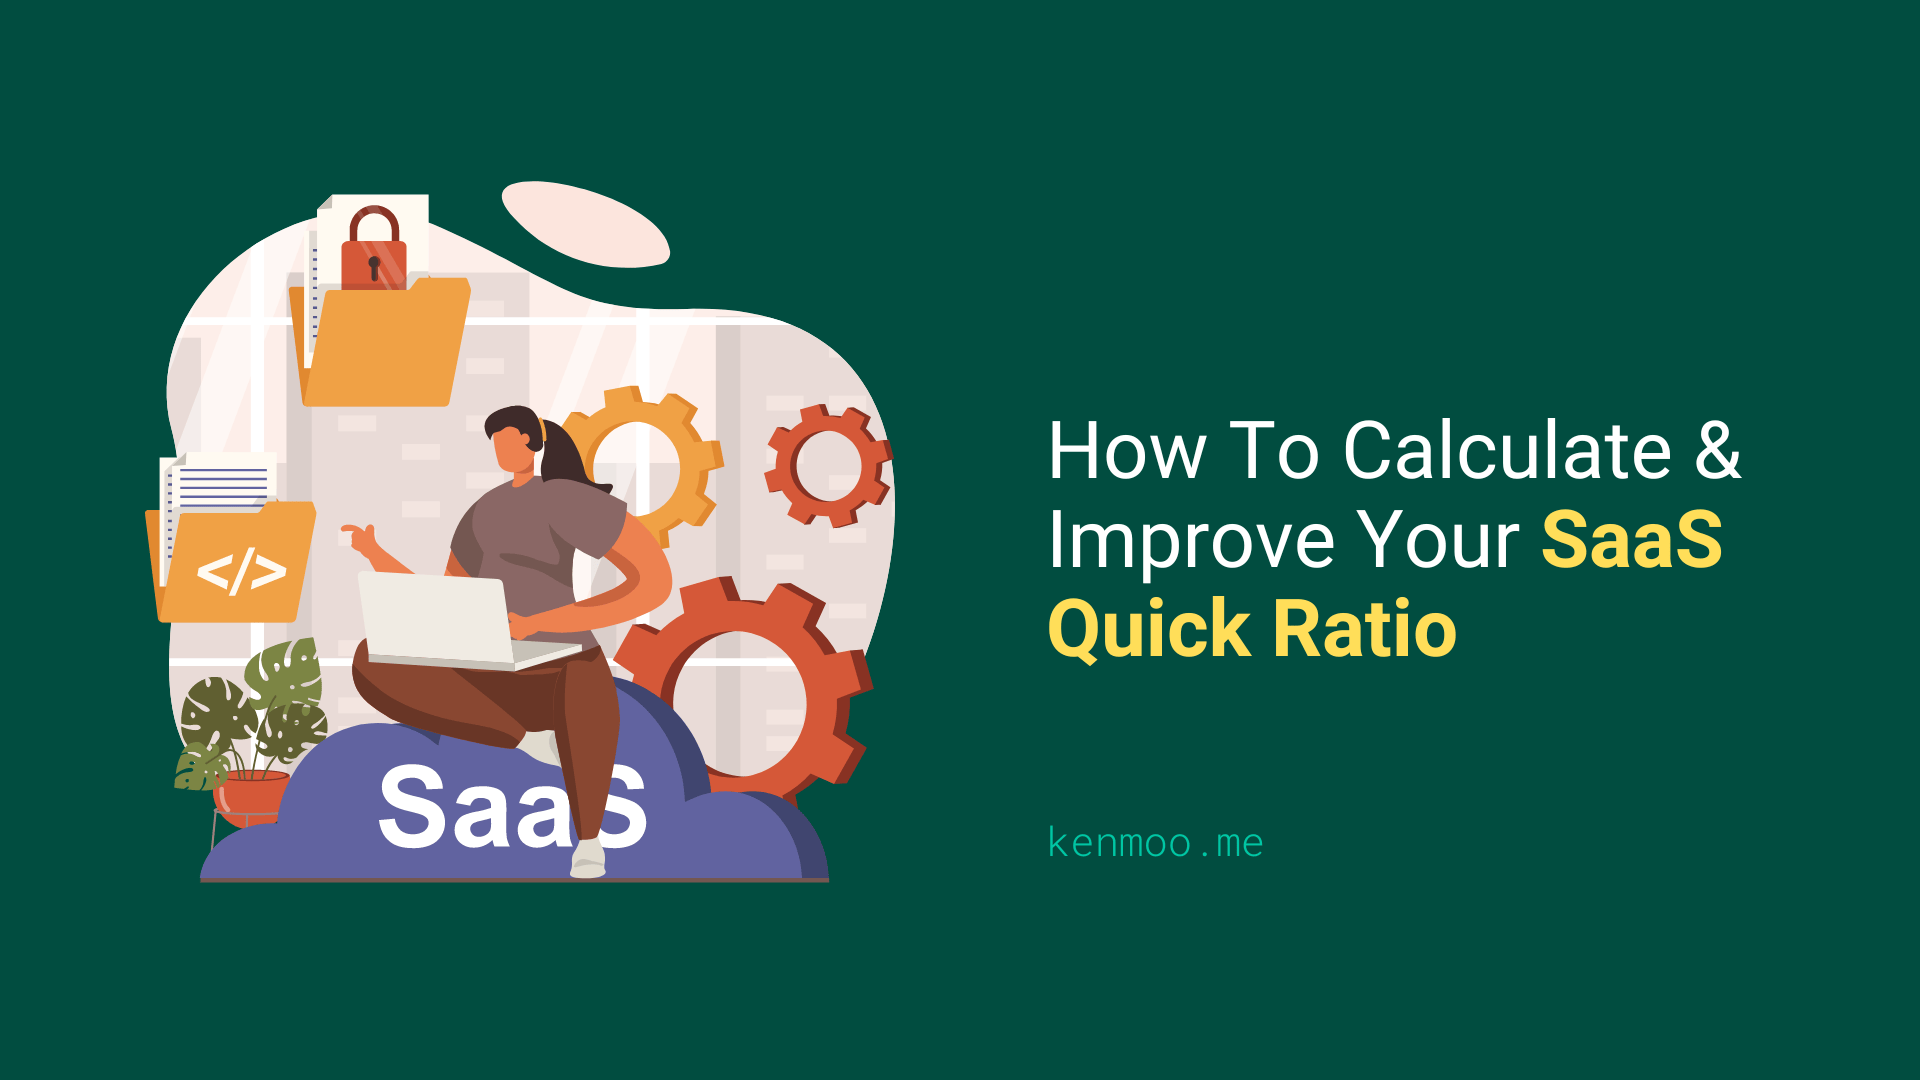 How To Calculate & Improve Your SaaS Quick Ratio